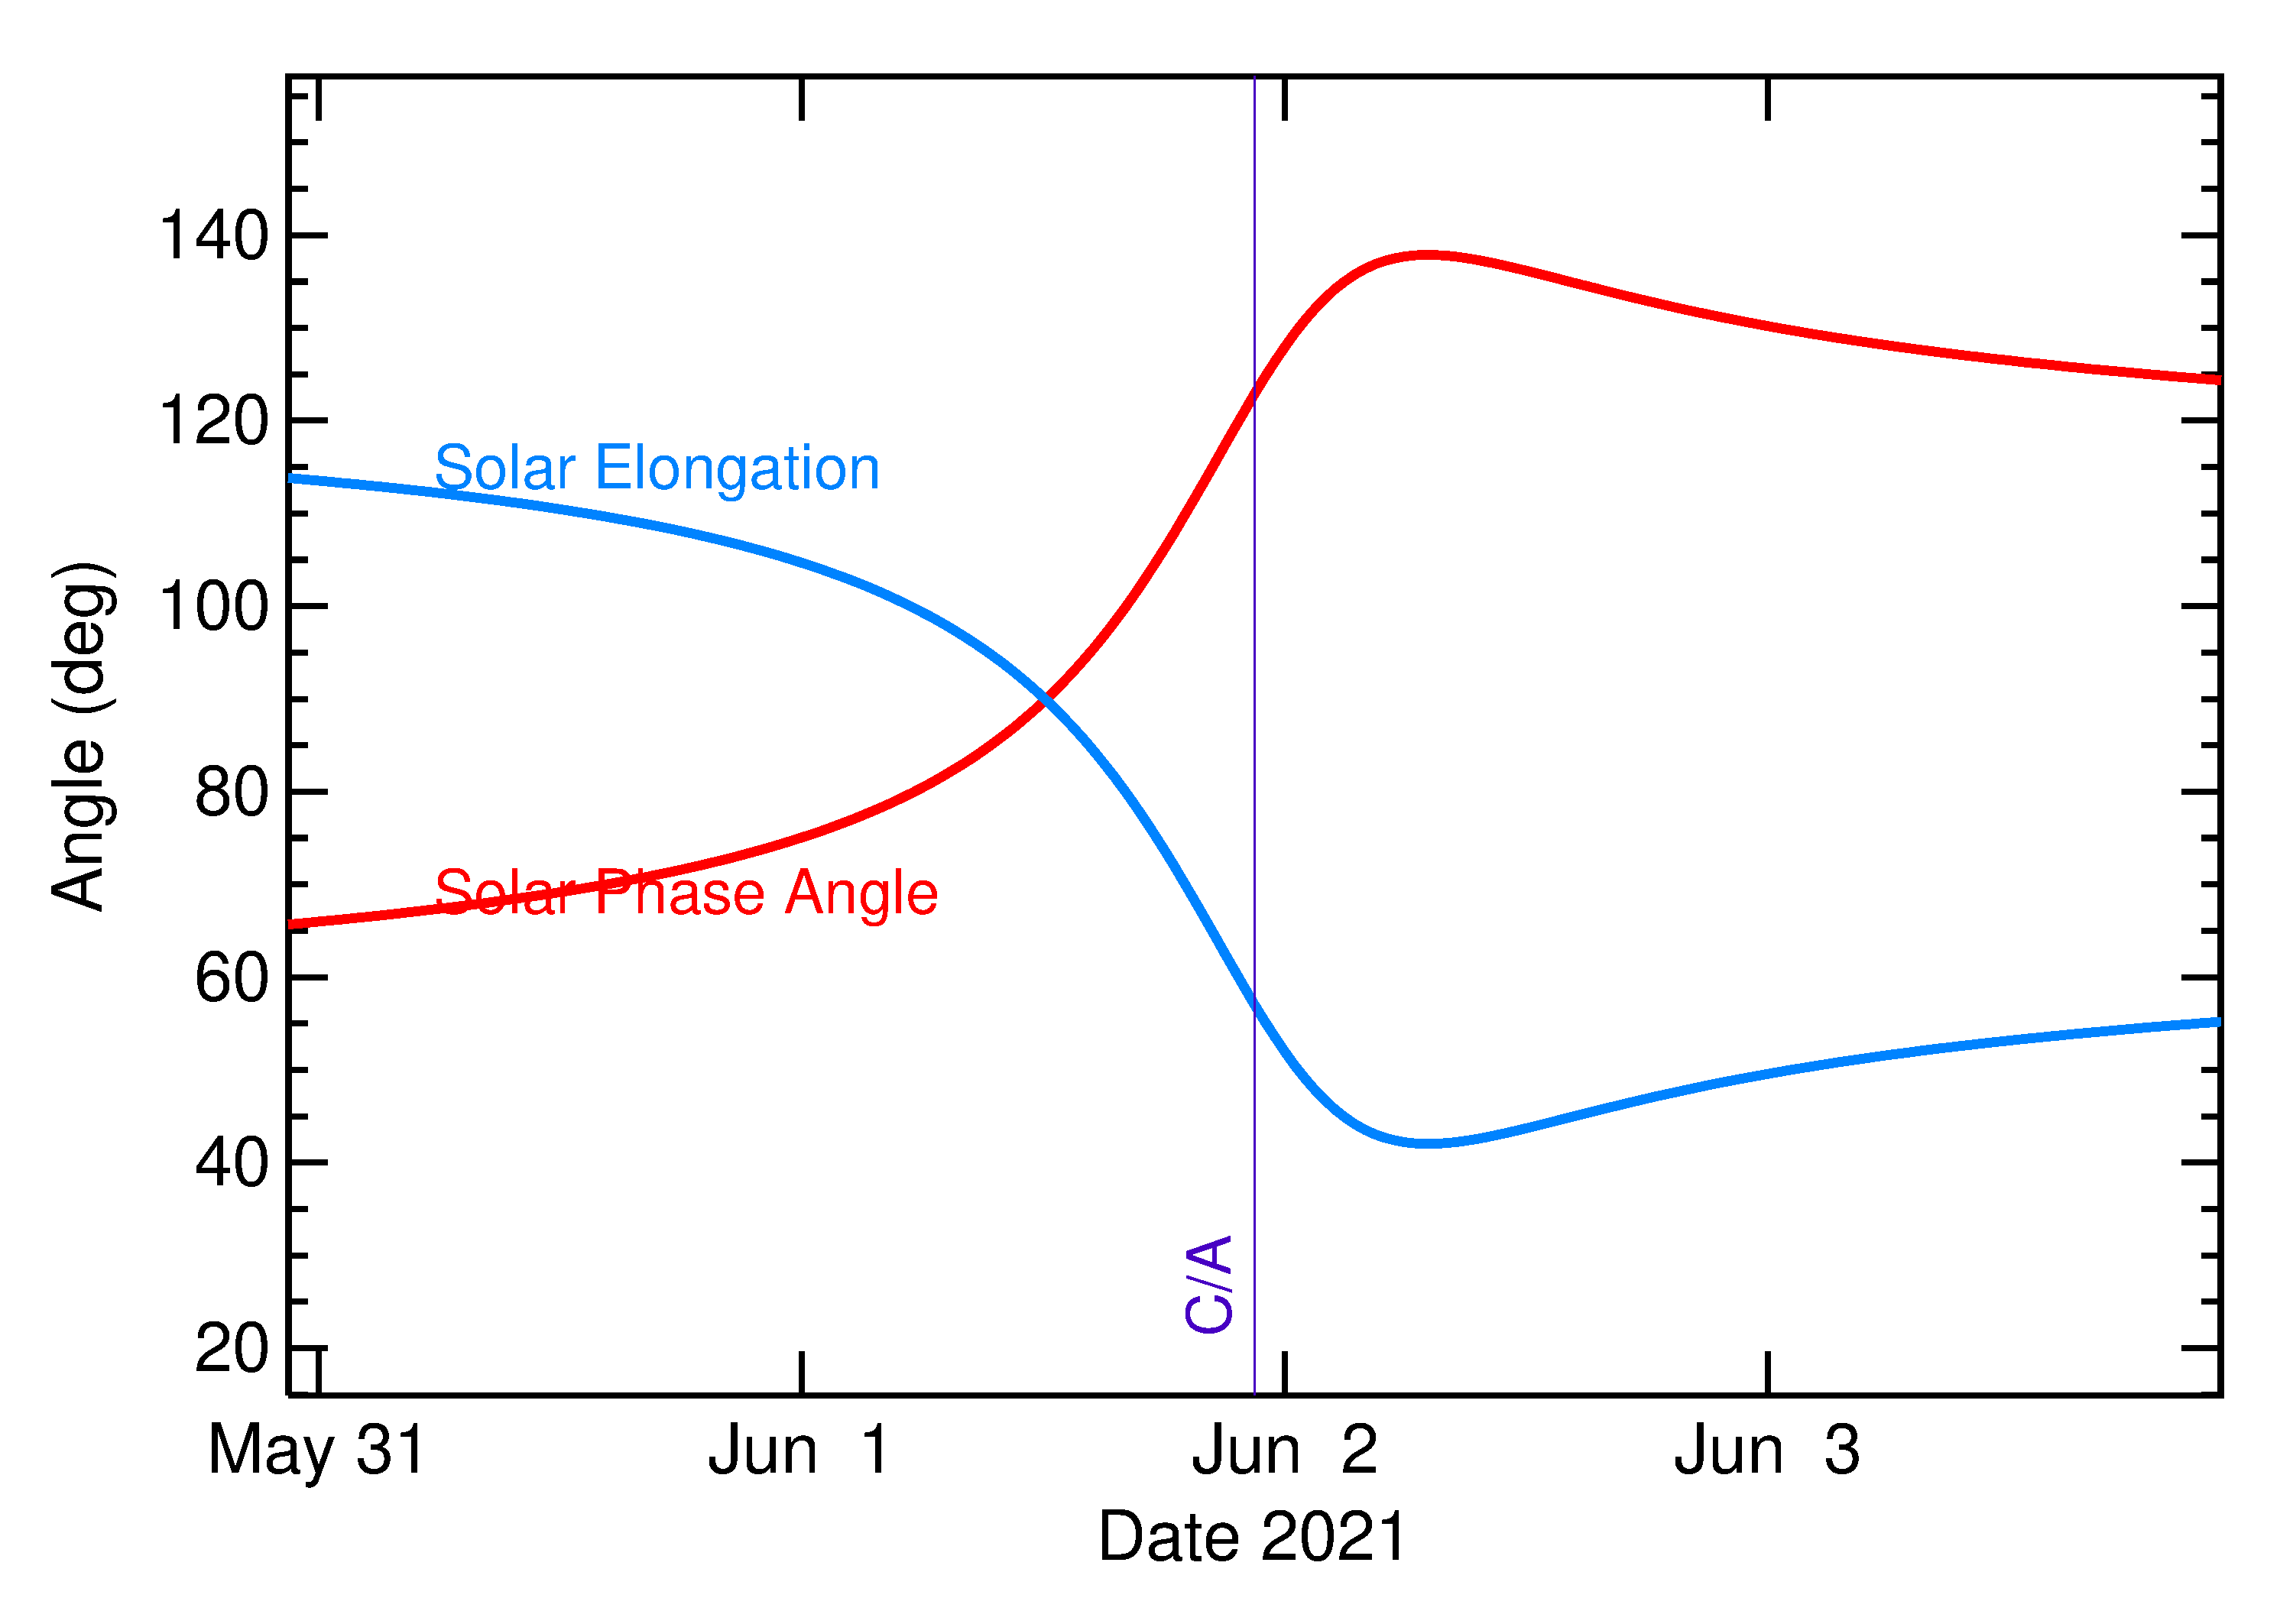 Solar Elongation and Solar Phase Angle of 2021 KT2 in the days around closest approach